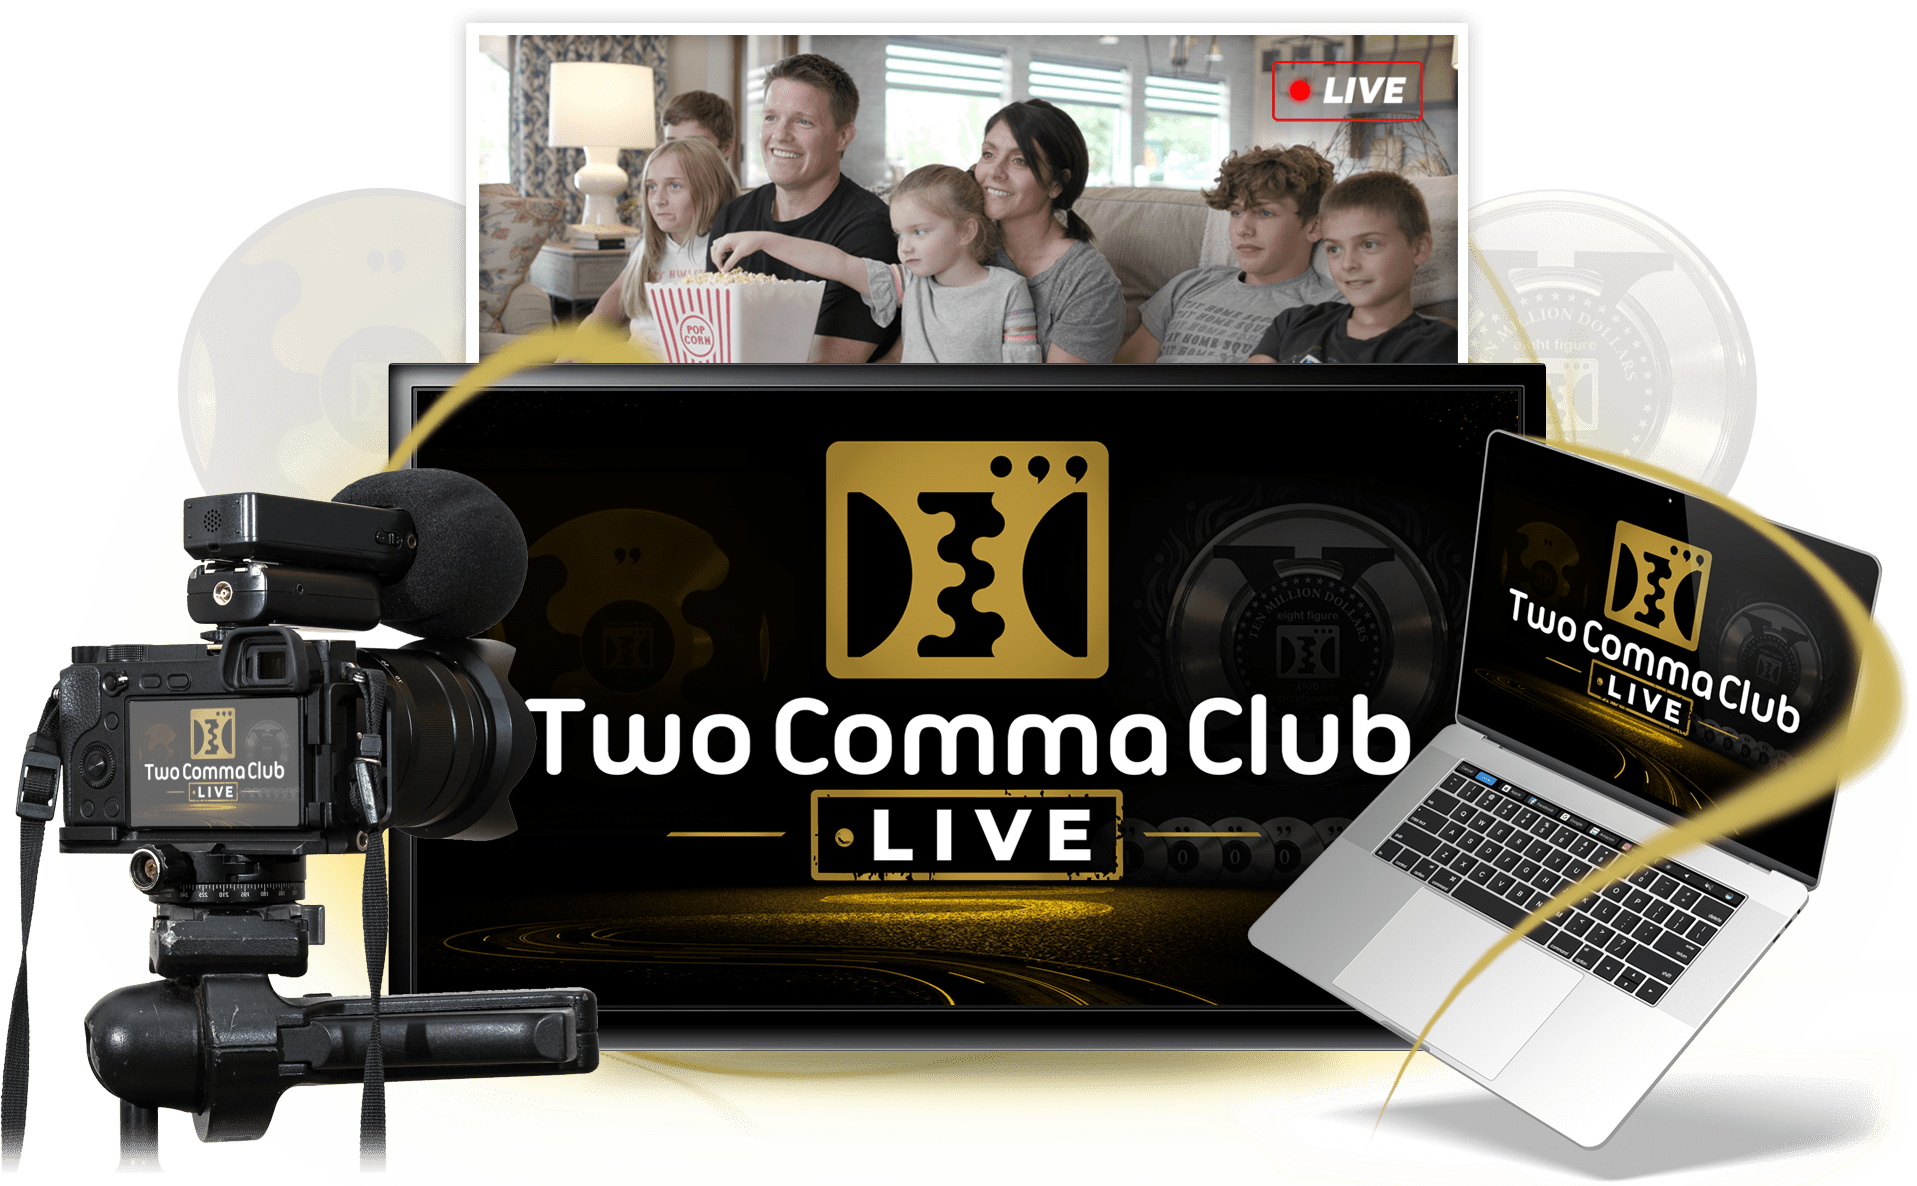 Russell Brunson - Two Comma Club LIVE Virtual Conference